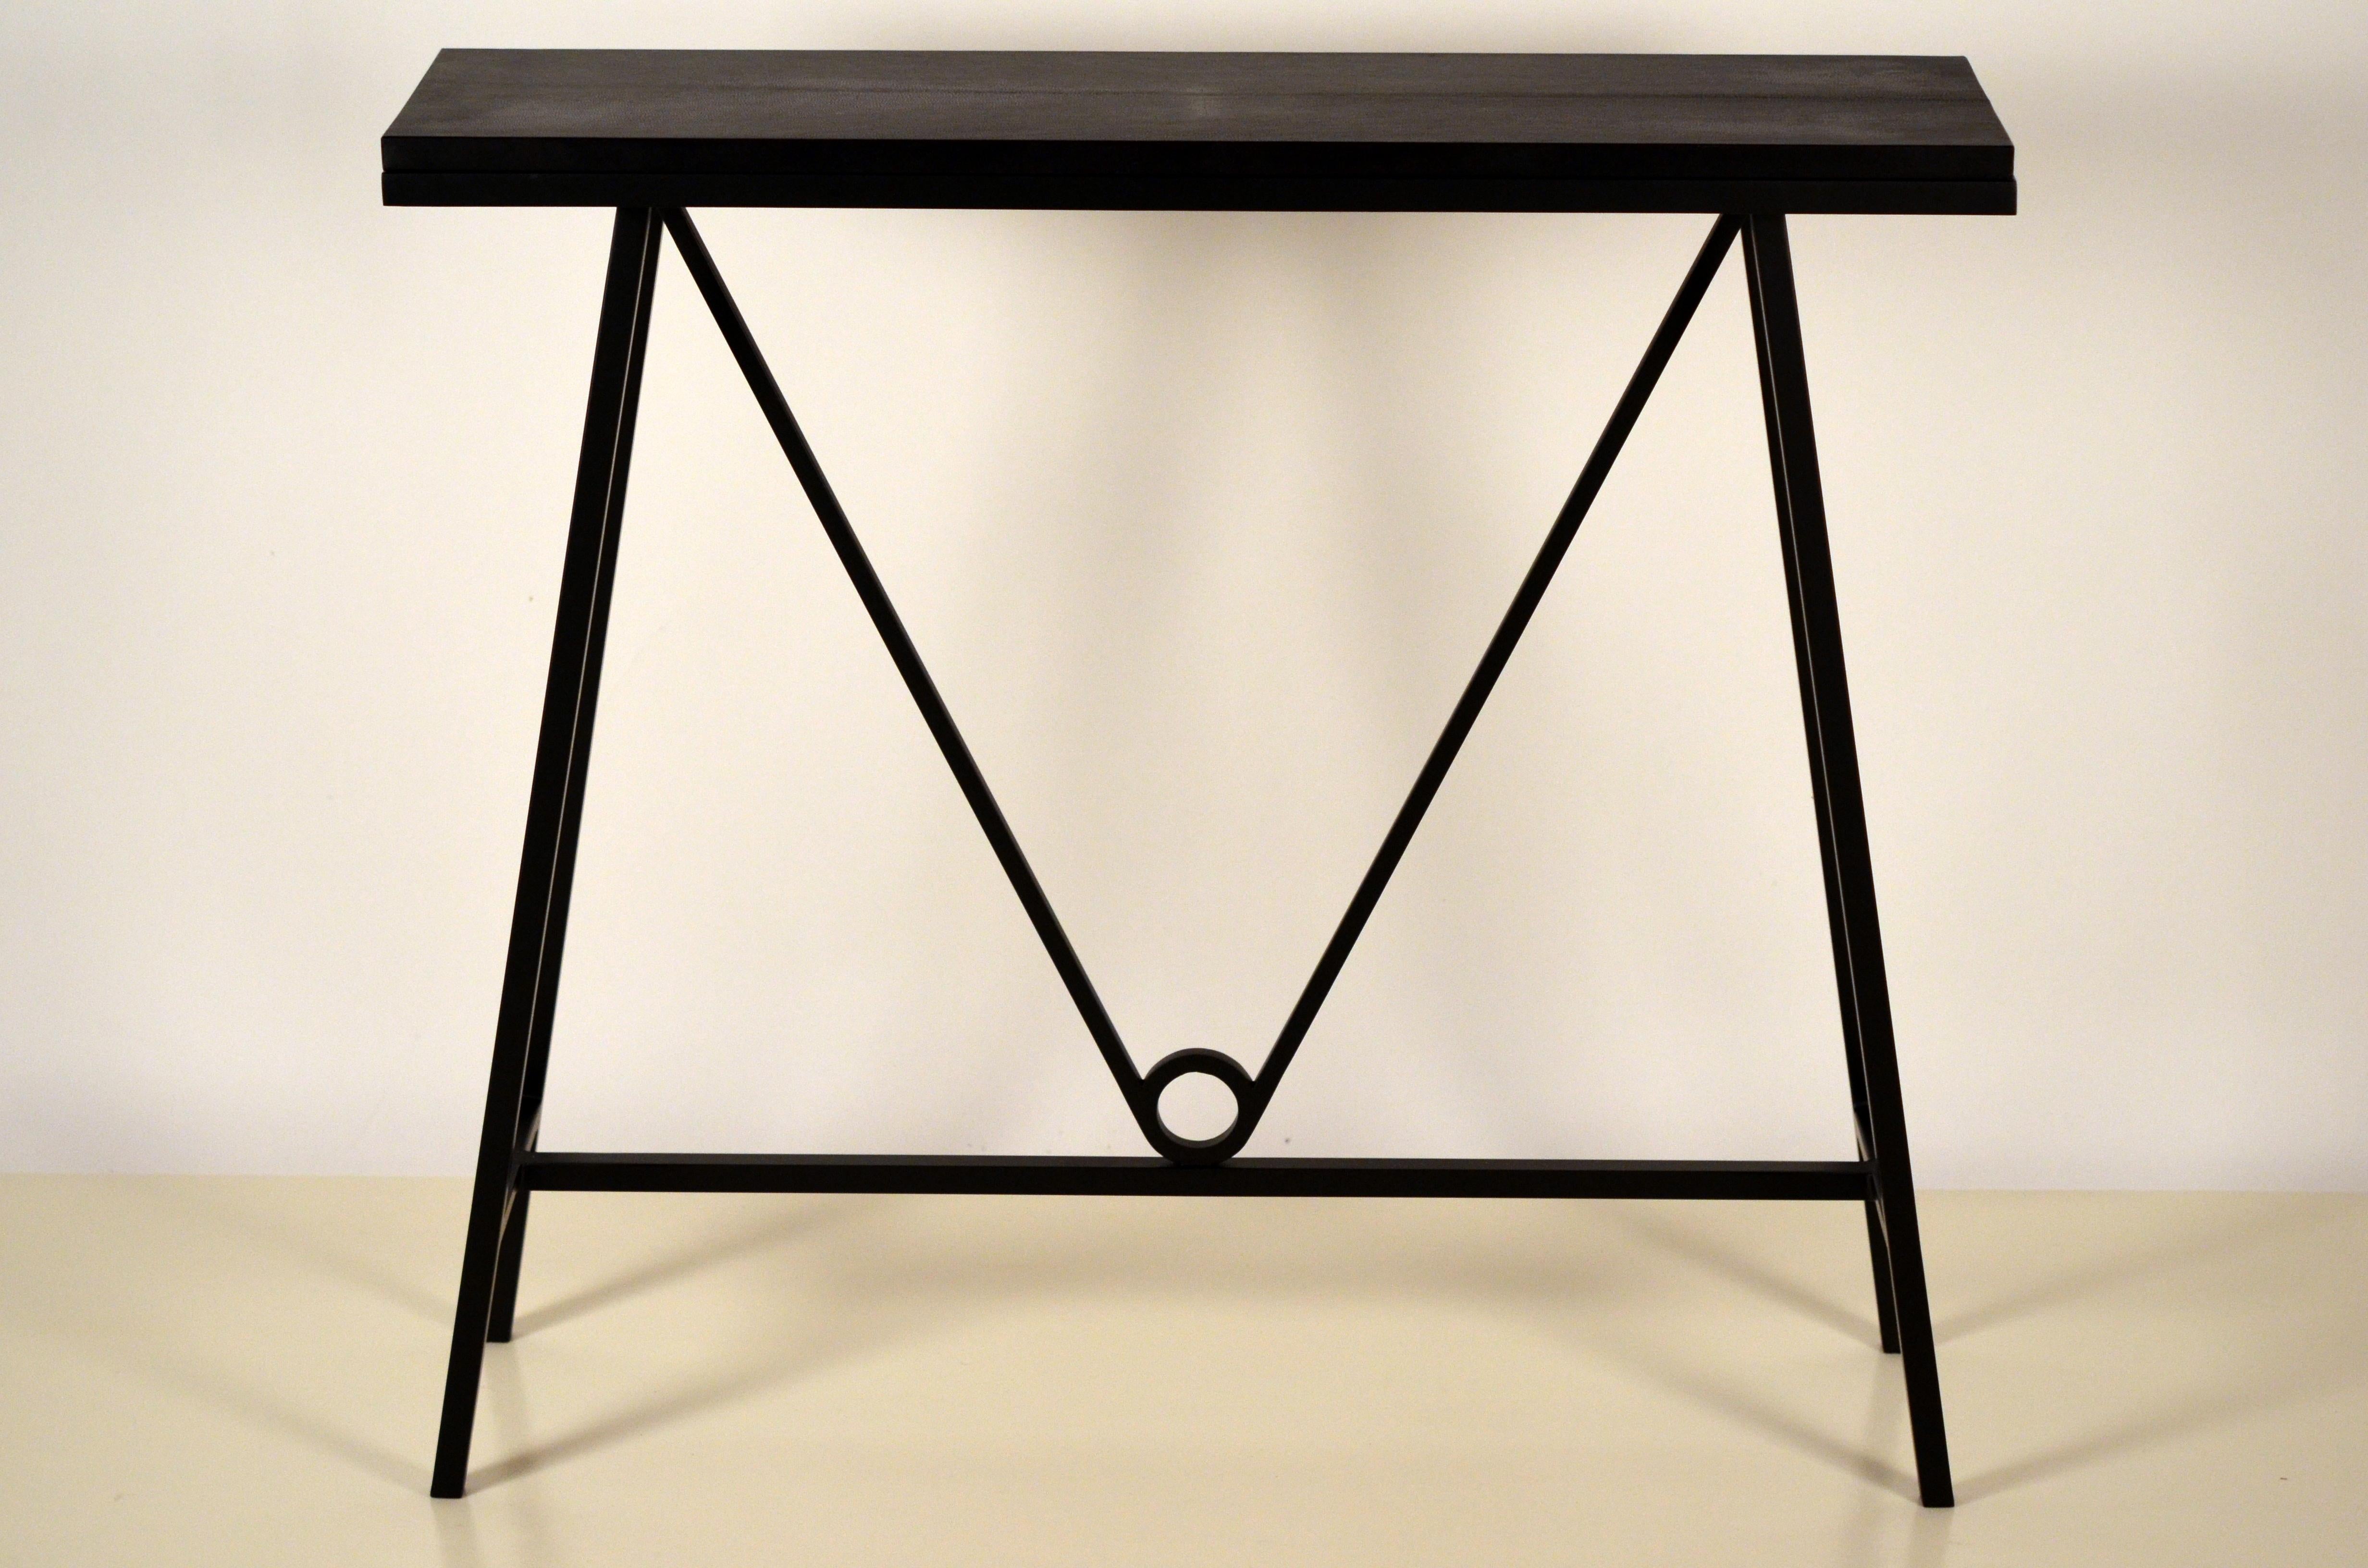 Appliqué 'Trapèze' Blackened Steel and Goatskin Console by Design Frères For Sale